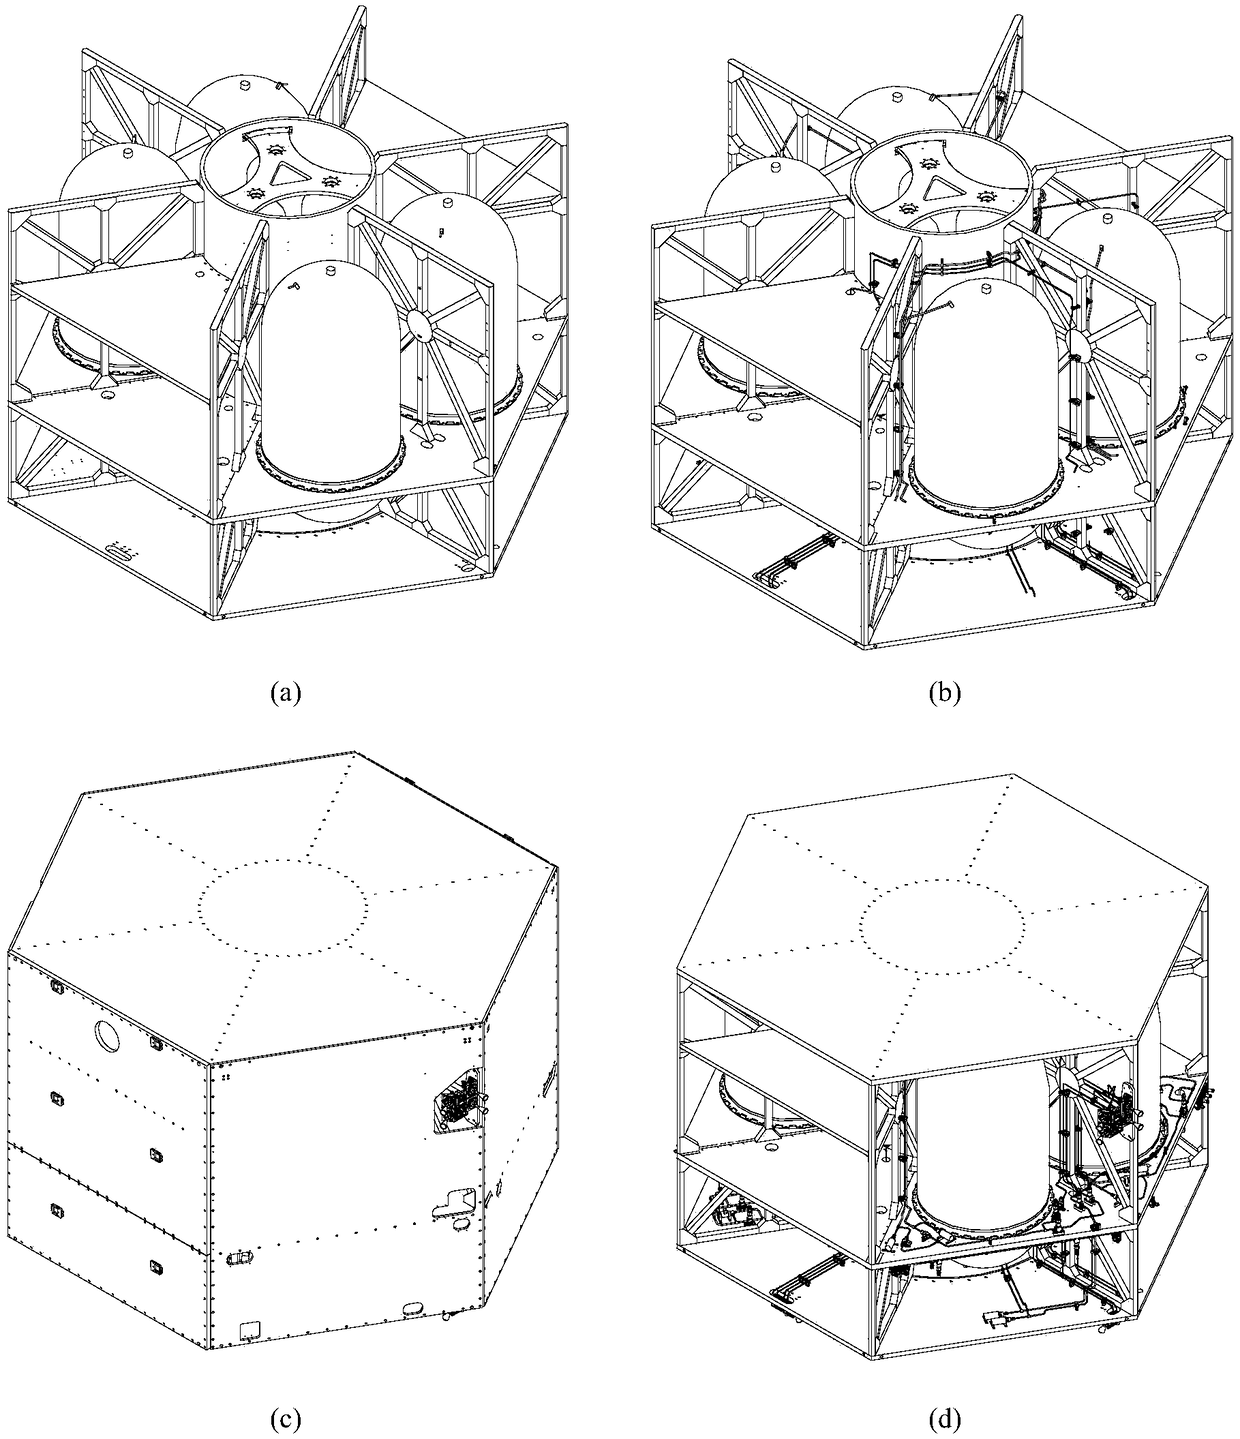 A high-orbit satellite assembly method based on bipropellant unified propulsion system